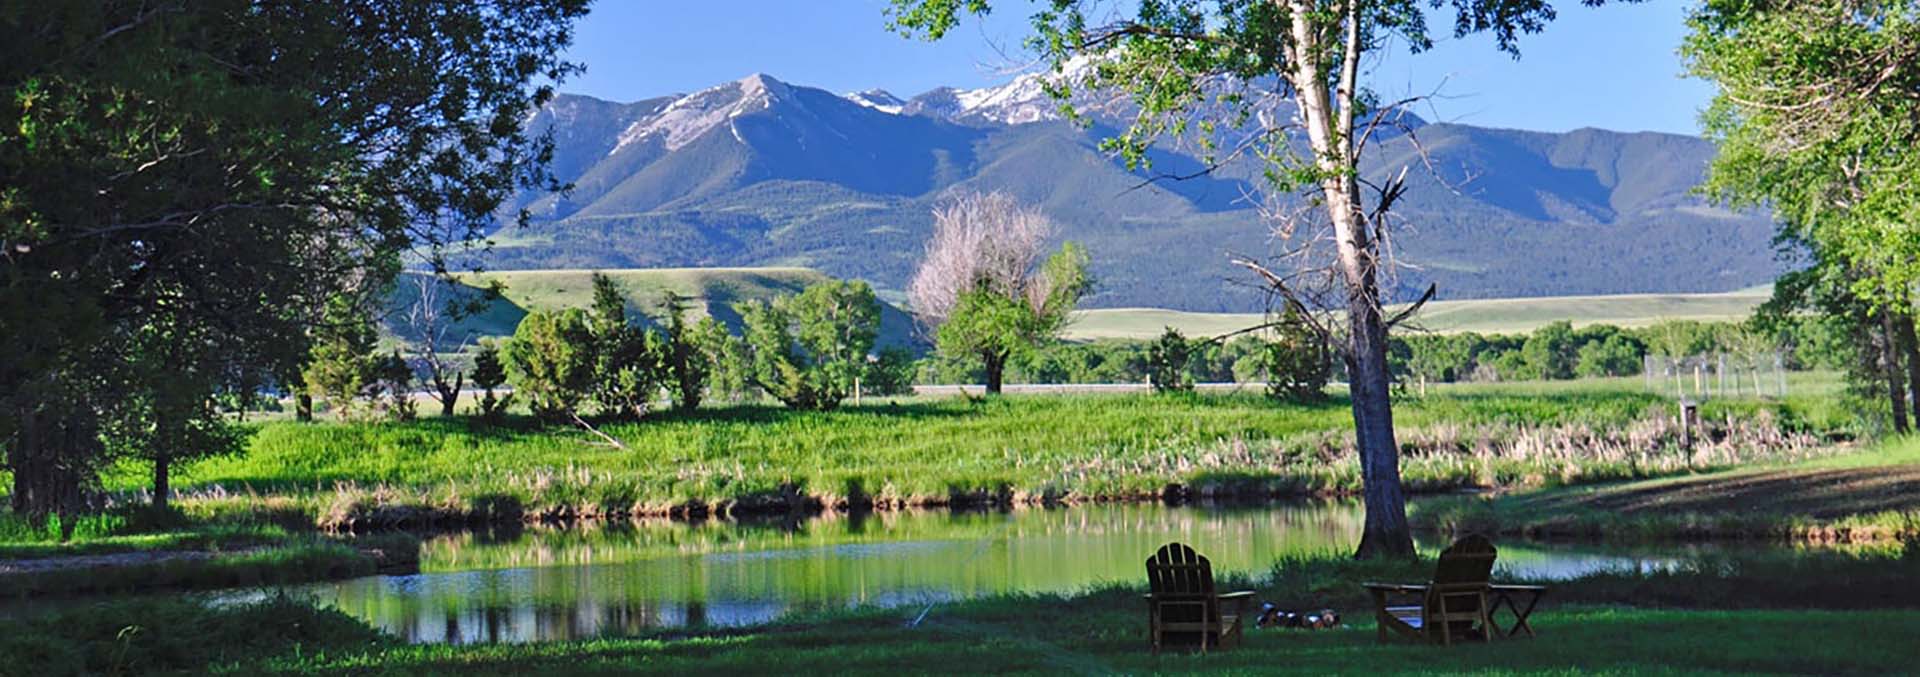 montana ranches for sale yellowstone preserve ranch